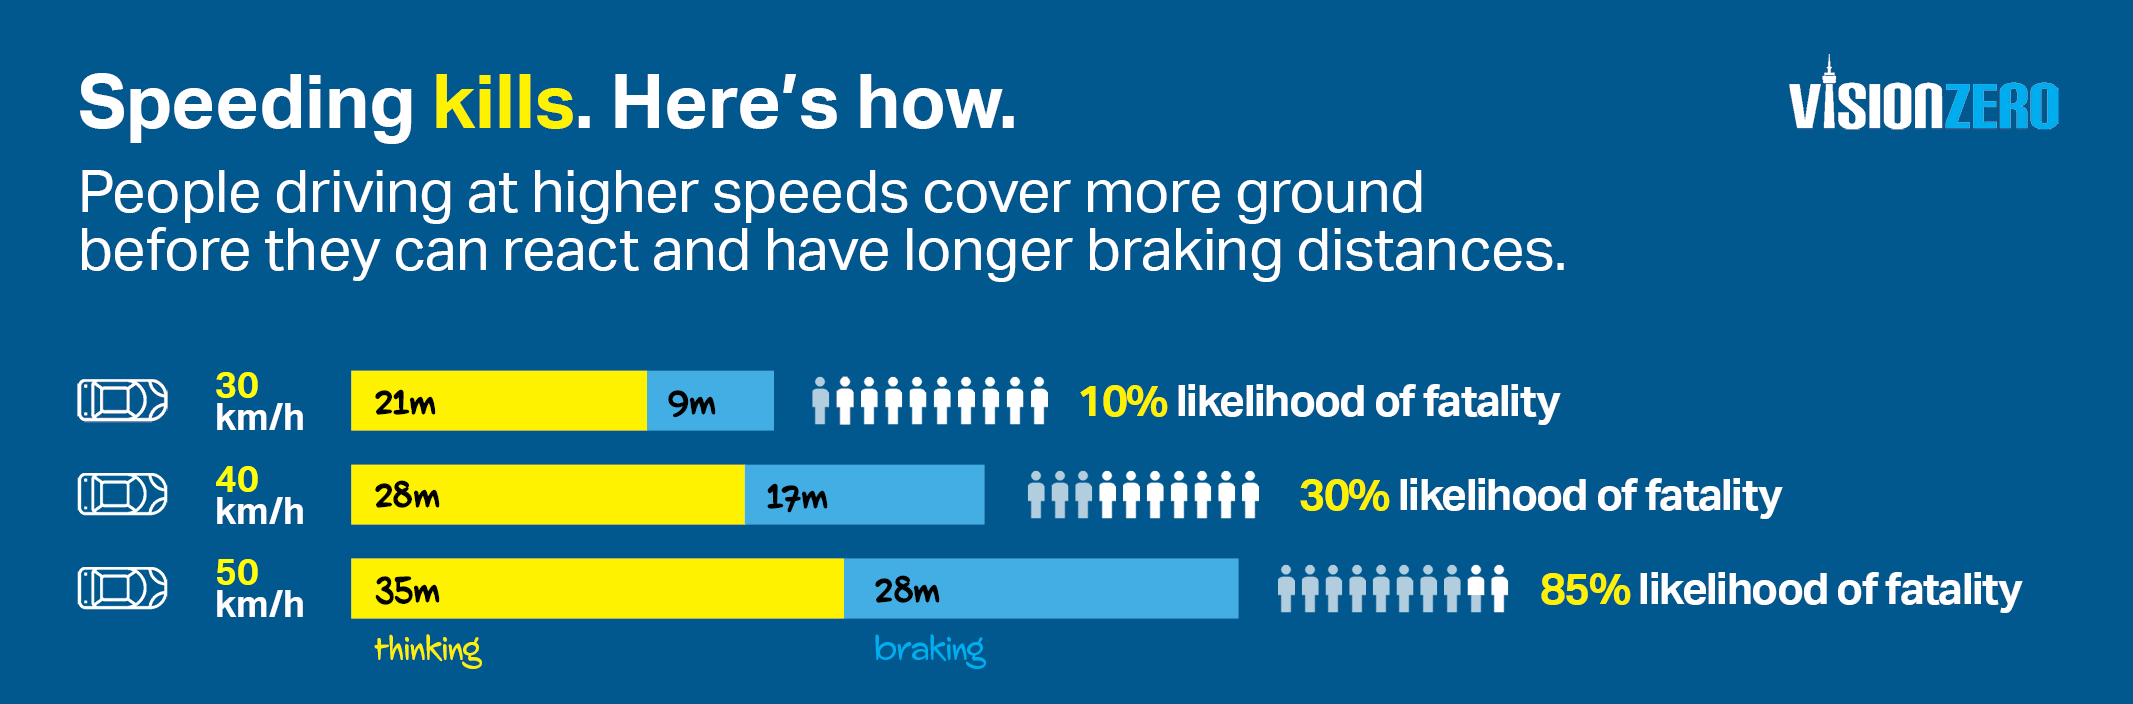 infographic describing how people driving at higher speeds cover more ground before they can react and have longer braking distances. Infographic features three sets of cars traveling at various speeds and the corresponding likelihood of fatality.